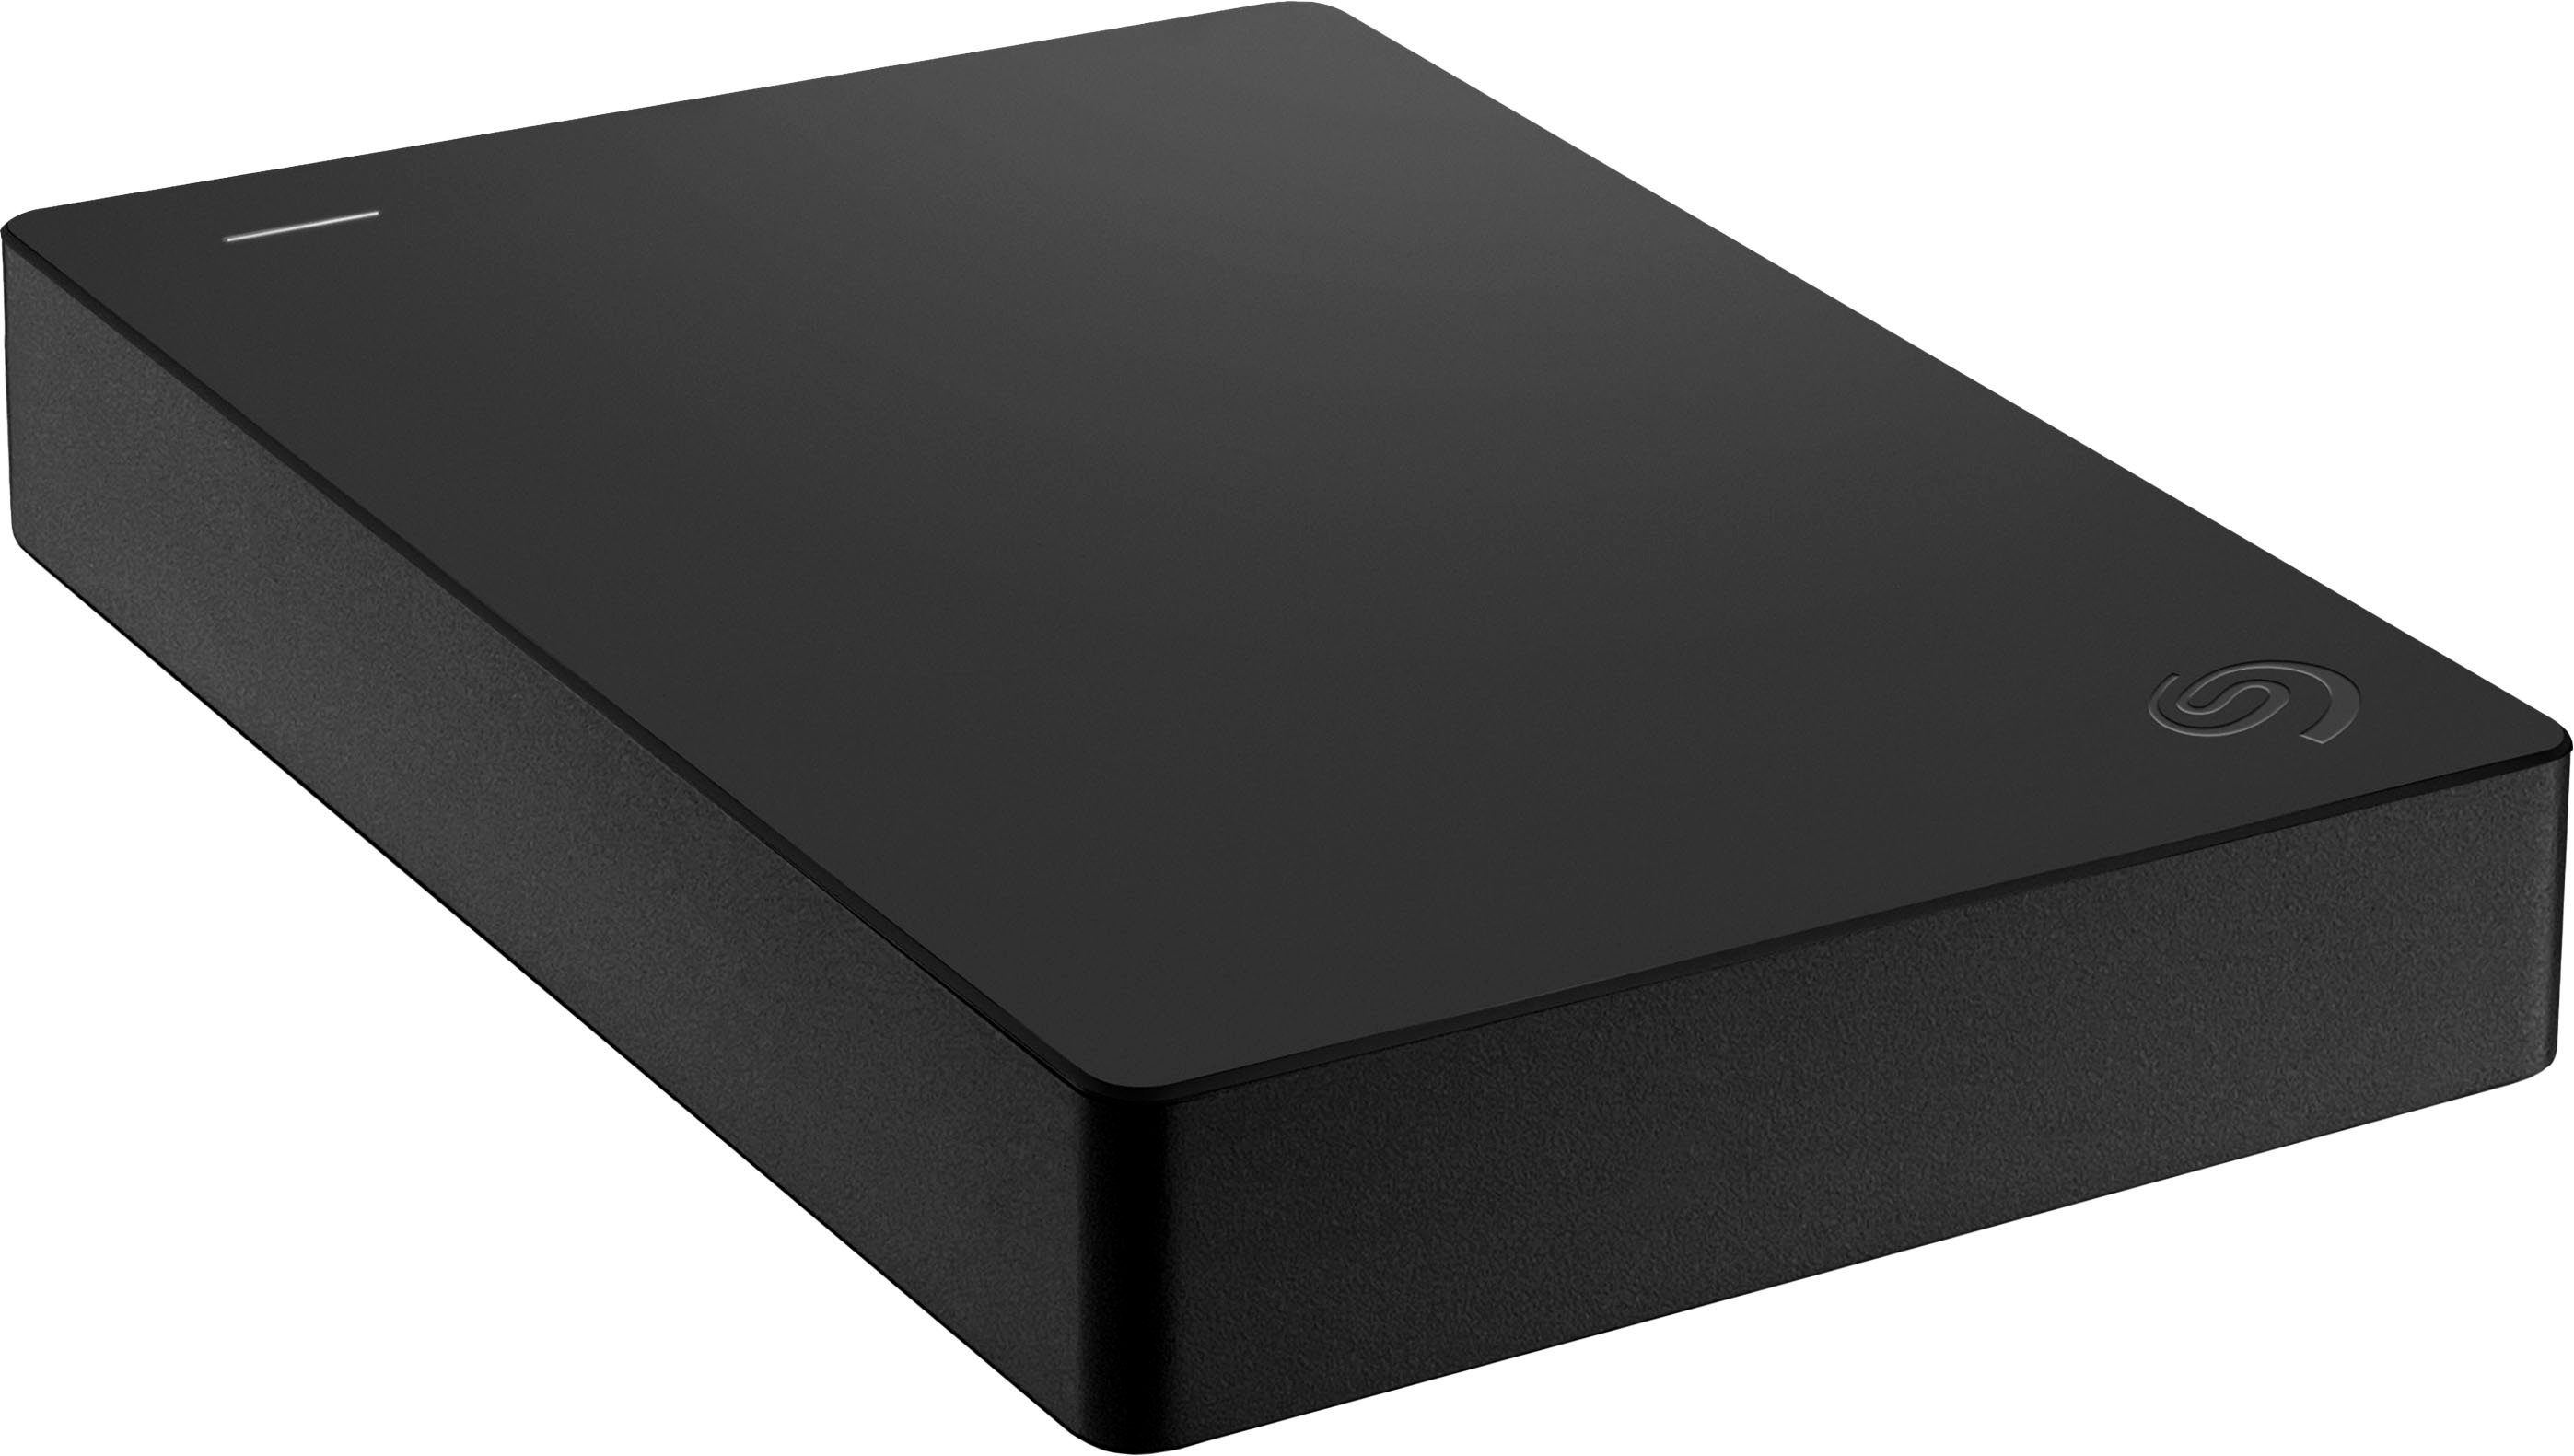 Seagate 5TB External USB 3.0 Portable Hard Drive with Rescue Data